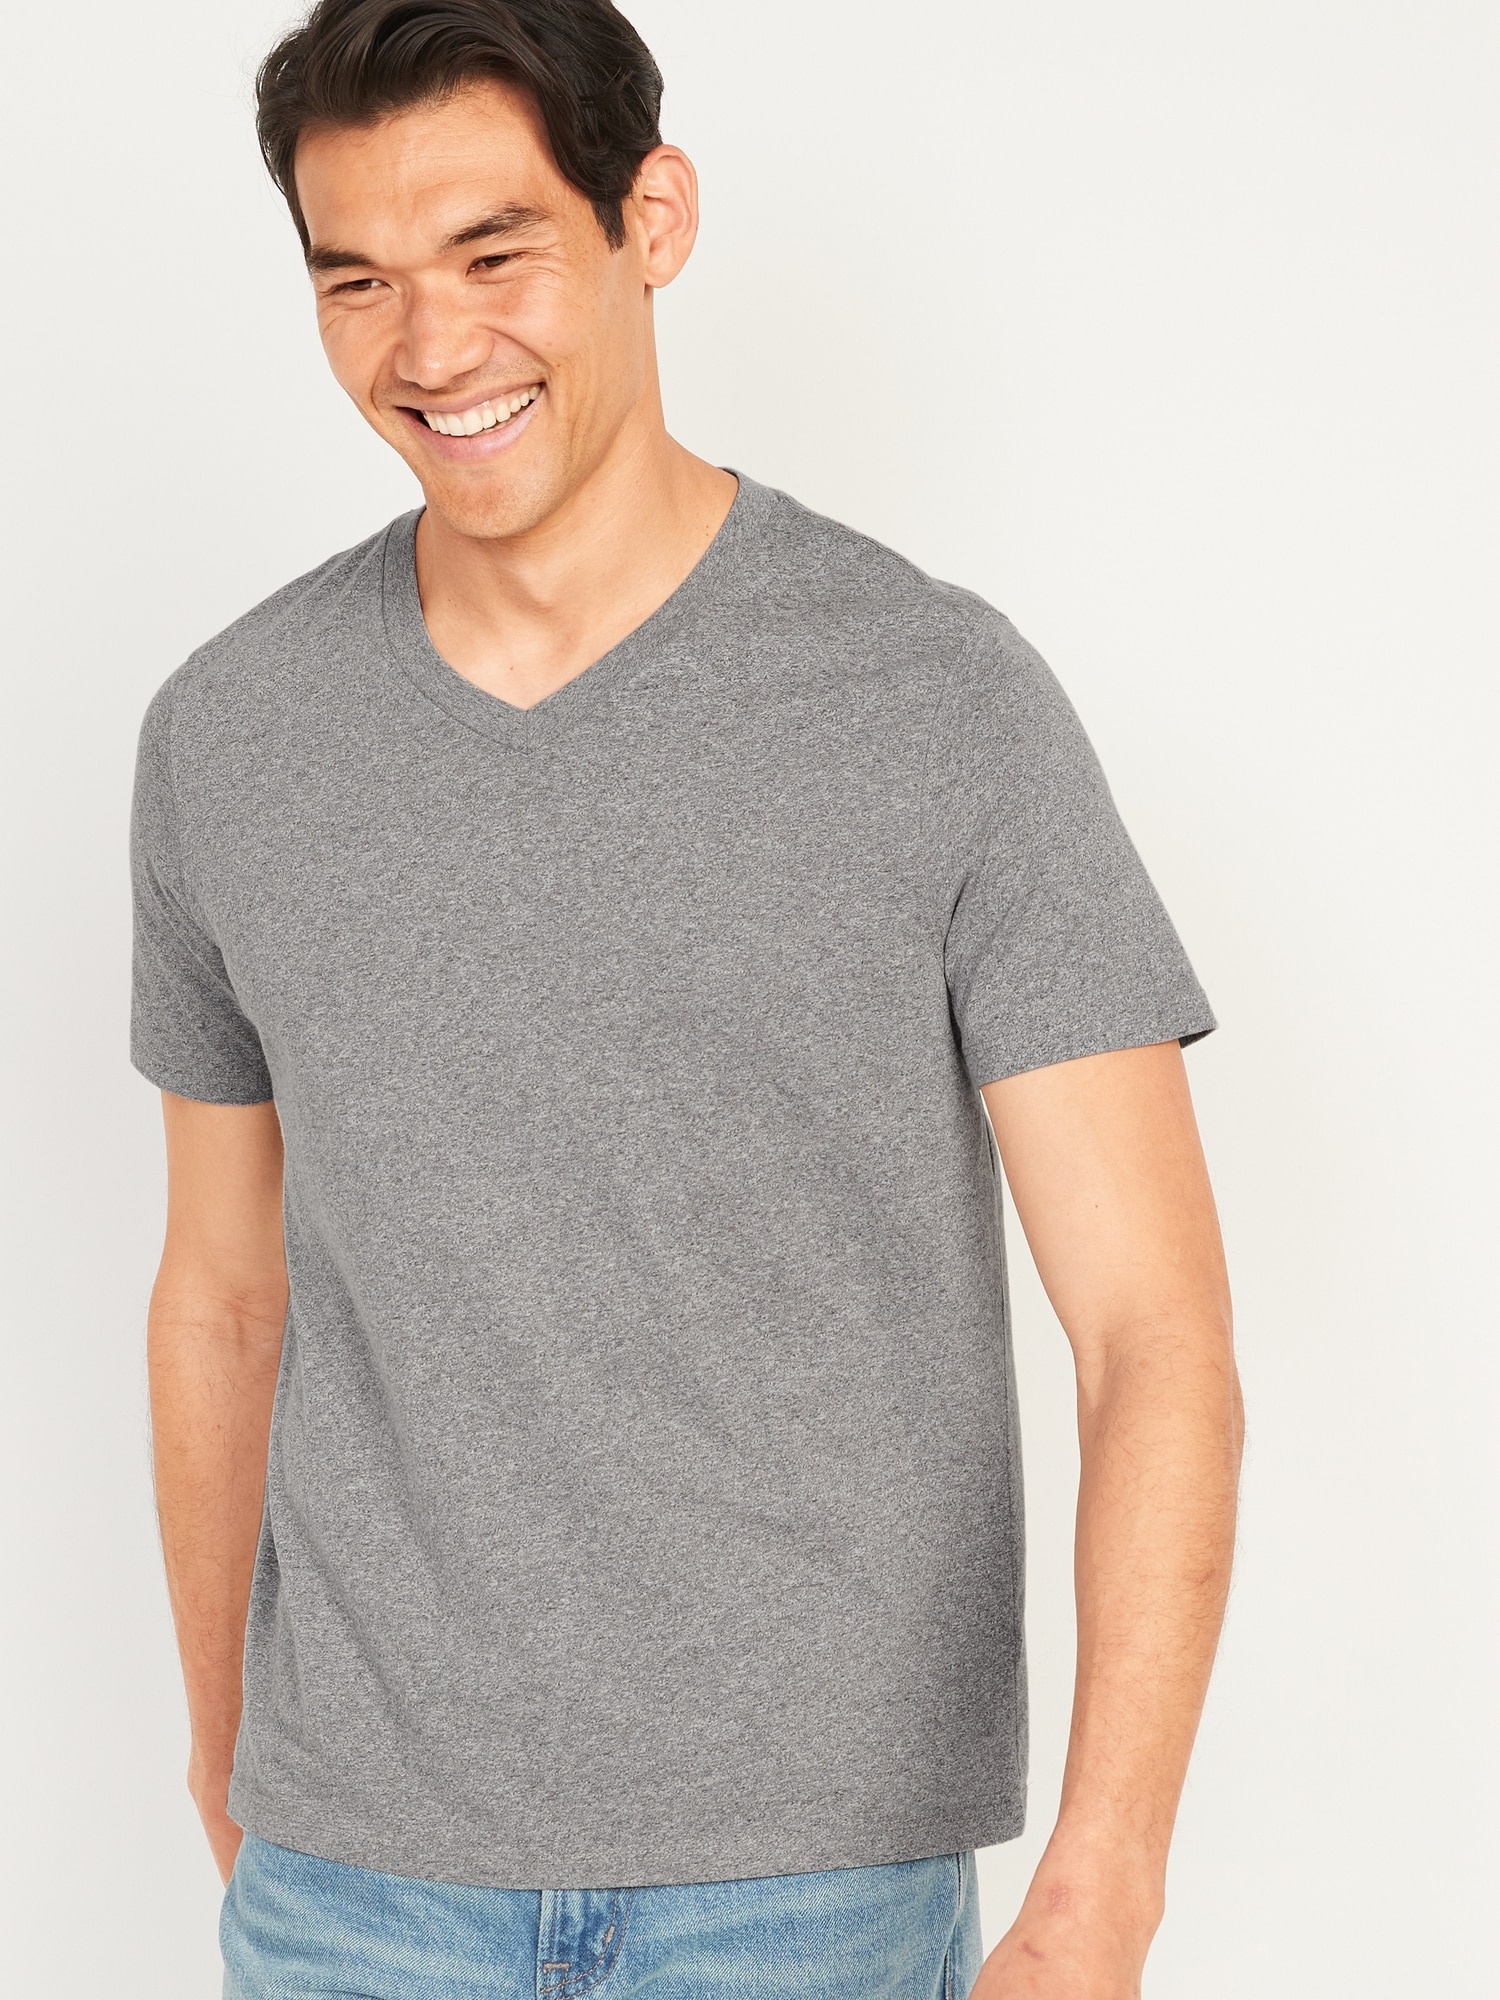 Old Navy T-Shirts for Men